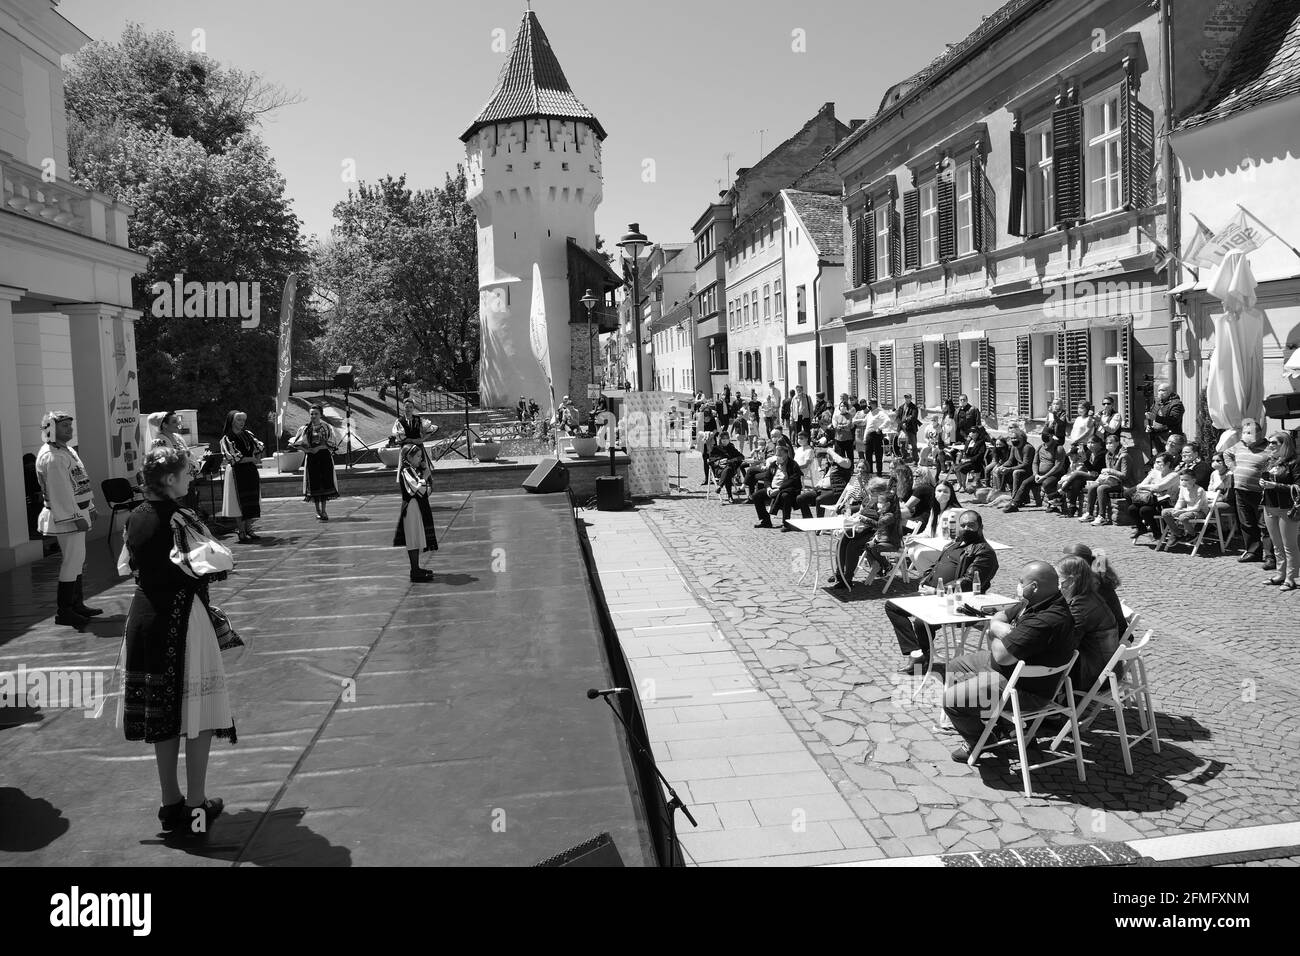 A vaccination marathon and concert in Sibiu in Romania today (09/05/21) in an effort to speed up the country's vaccination programme. Picture by Adam Alexander Stock Photo